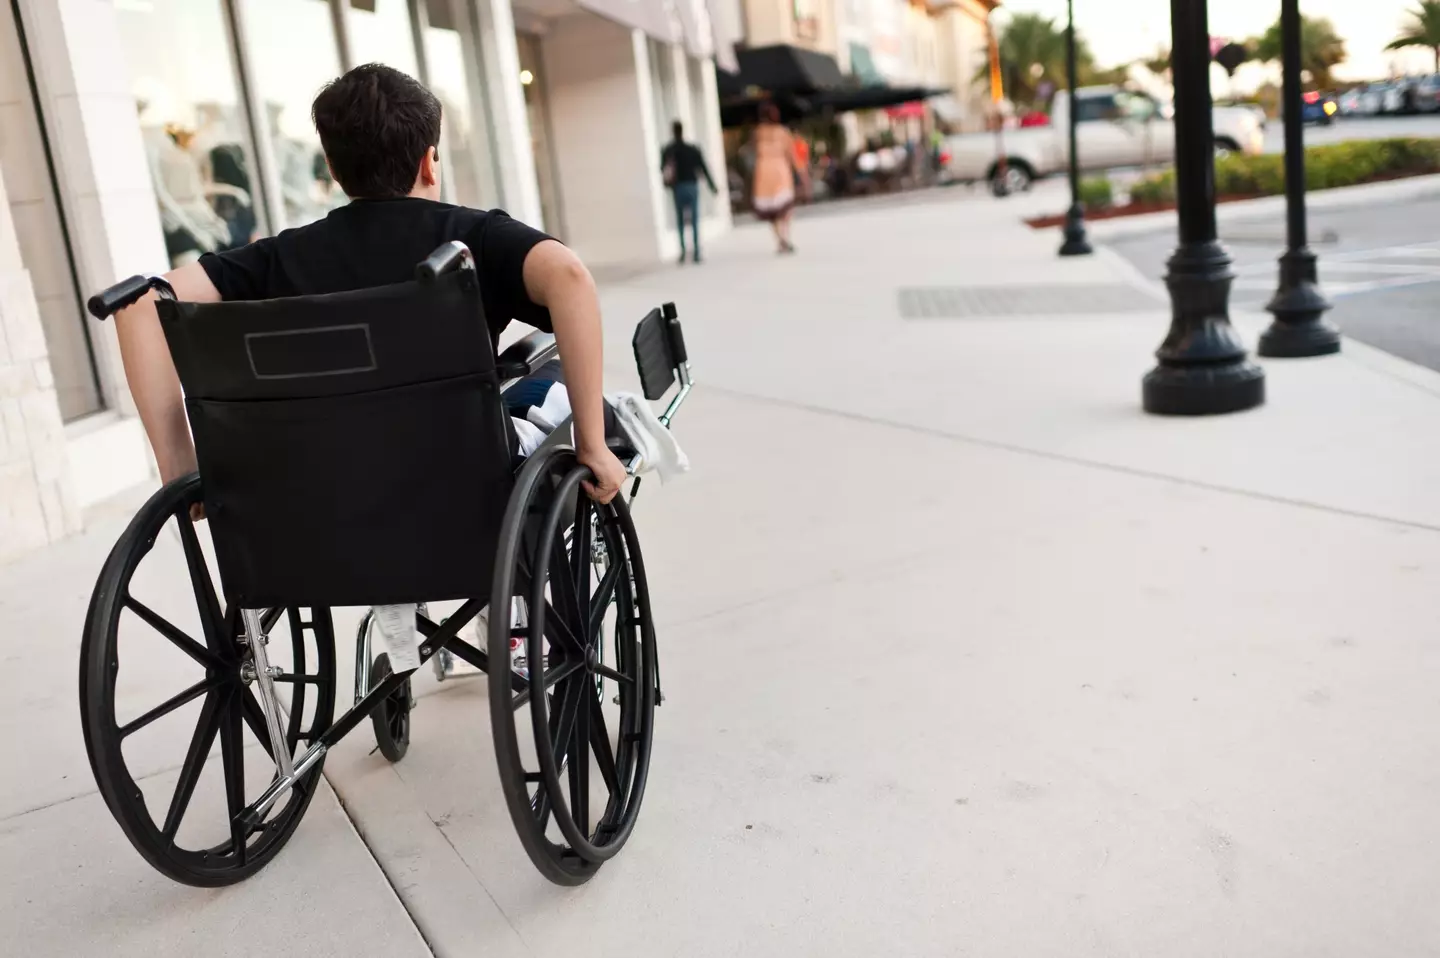 Wheelchair users told her they understood completely the frustration with people touching their vital equipment.